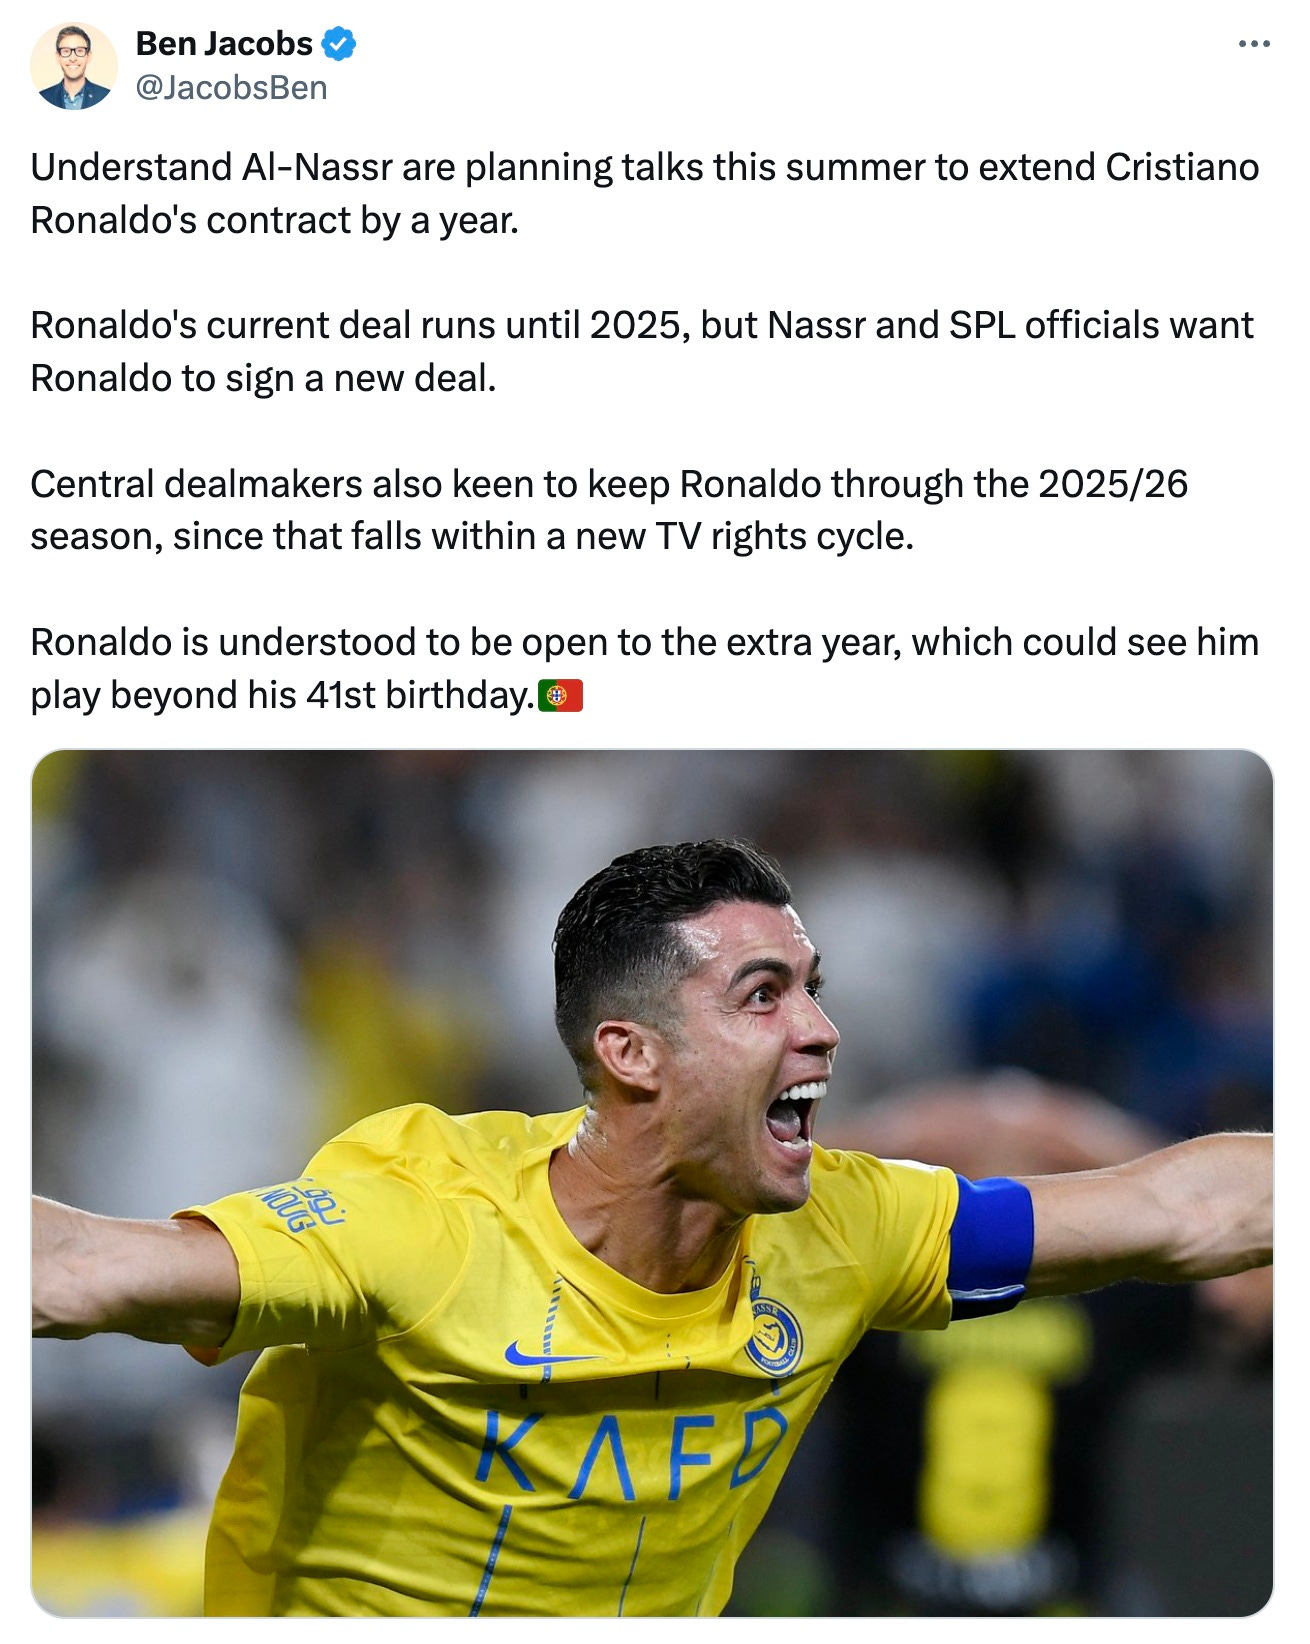 A tweet by Ben Jacobs about Al Nassr planning talks with Cristiano Ronaldo over a new contract